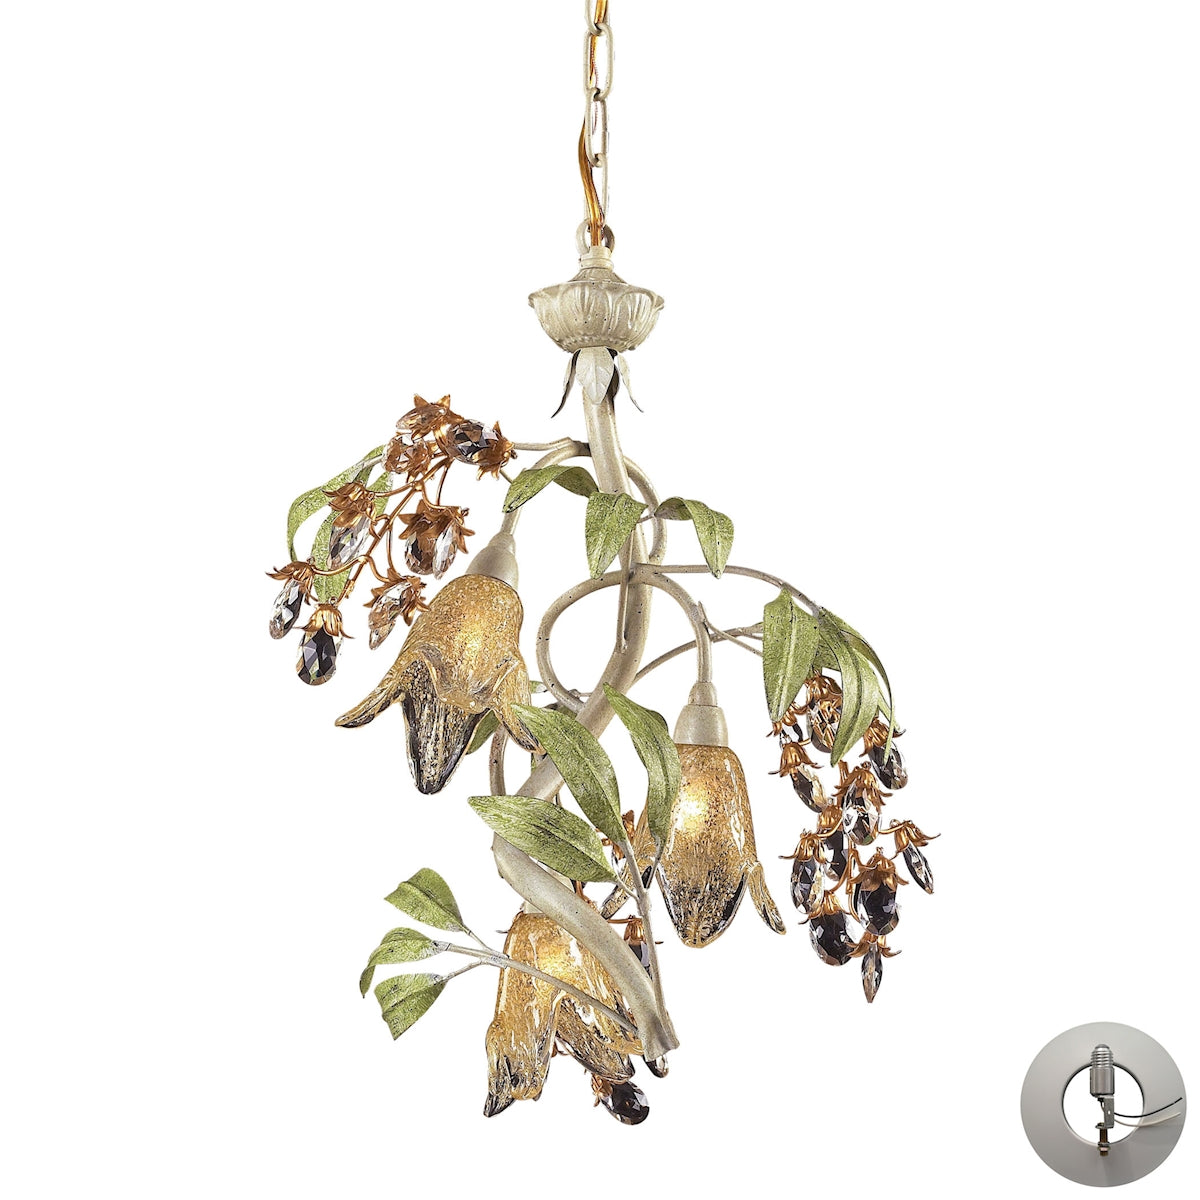 ELK Lighting 86051-LA Huarco 3-Light Chandelier in Seashell and Sage Green with Floral-shaped Glass - Includes Adapter Kit